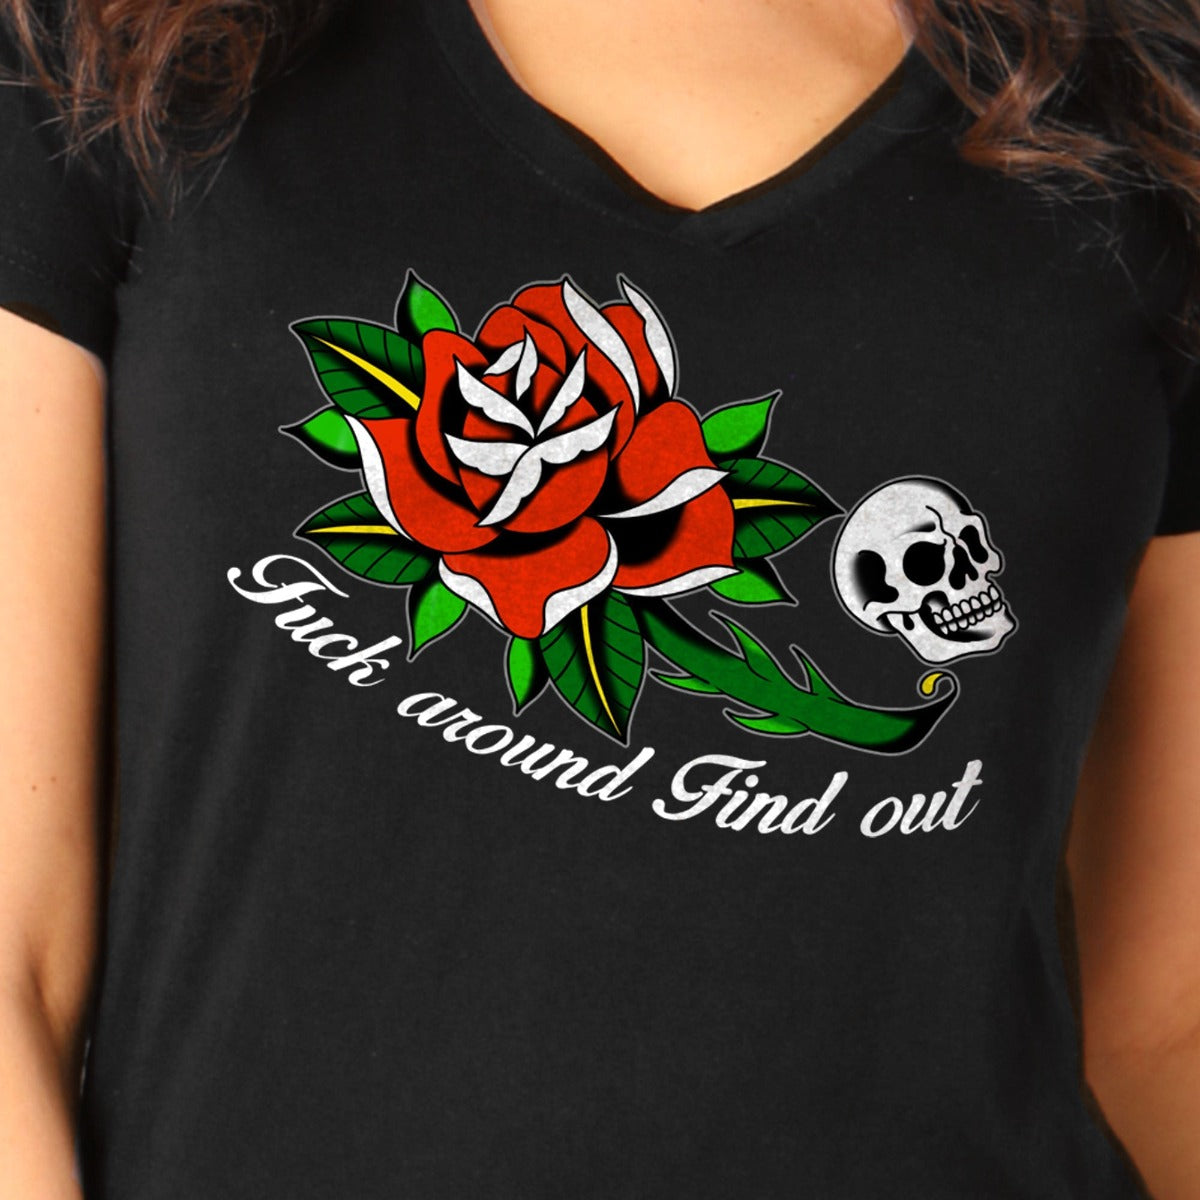 Hot Leathers Ladies Fvck Around Find Out Skull Shirt